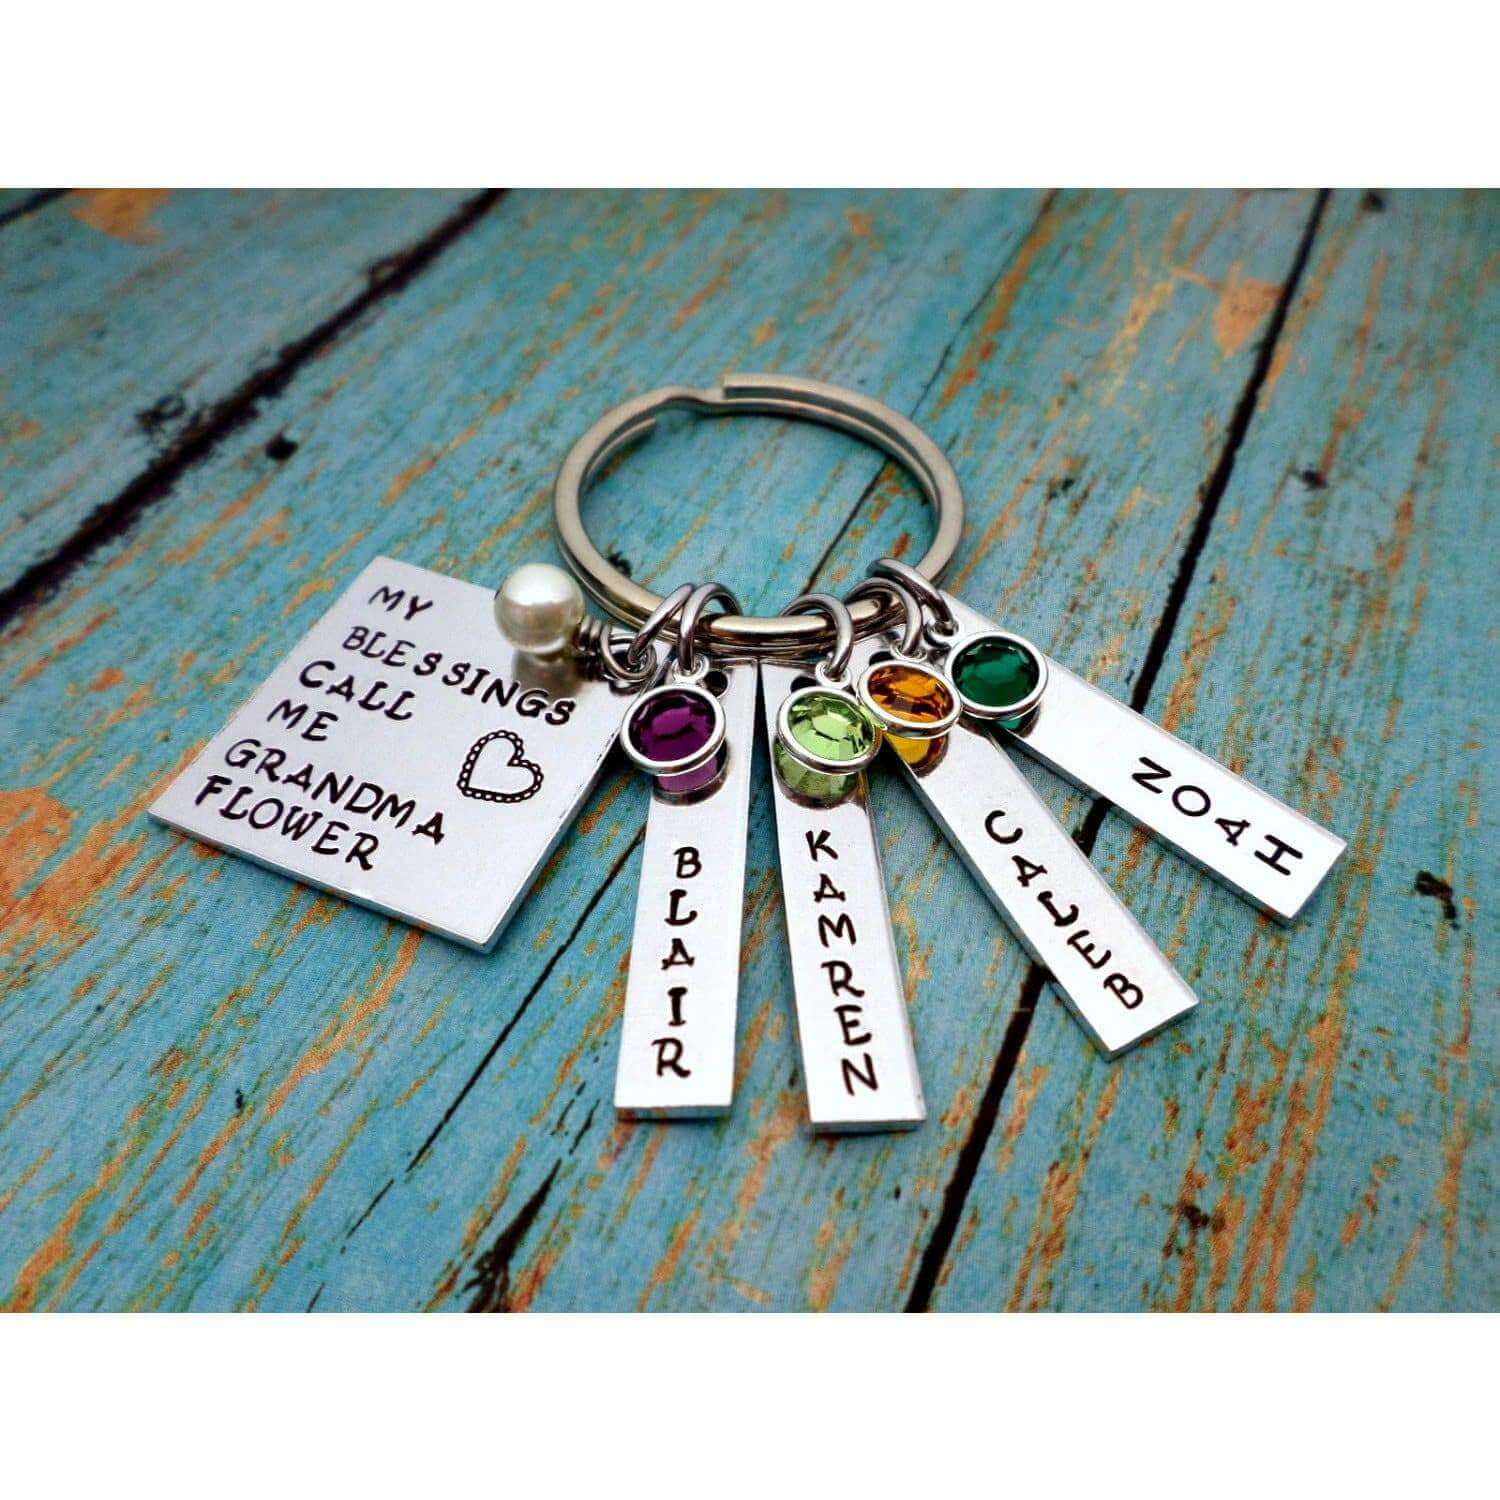 My Blessings Call Me Grandma, Name Tag Keychains, Swarovski Birthstones, Perfect Gift from the kids, Keychains, HandmadeLoveStories, HandmadeLoveStories , [Handmade_Love_Stories], [Hand_Stamped_Jewelry], [Etsy_Stamped_Jewelry], [Etsy_Jewelry]